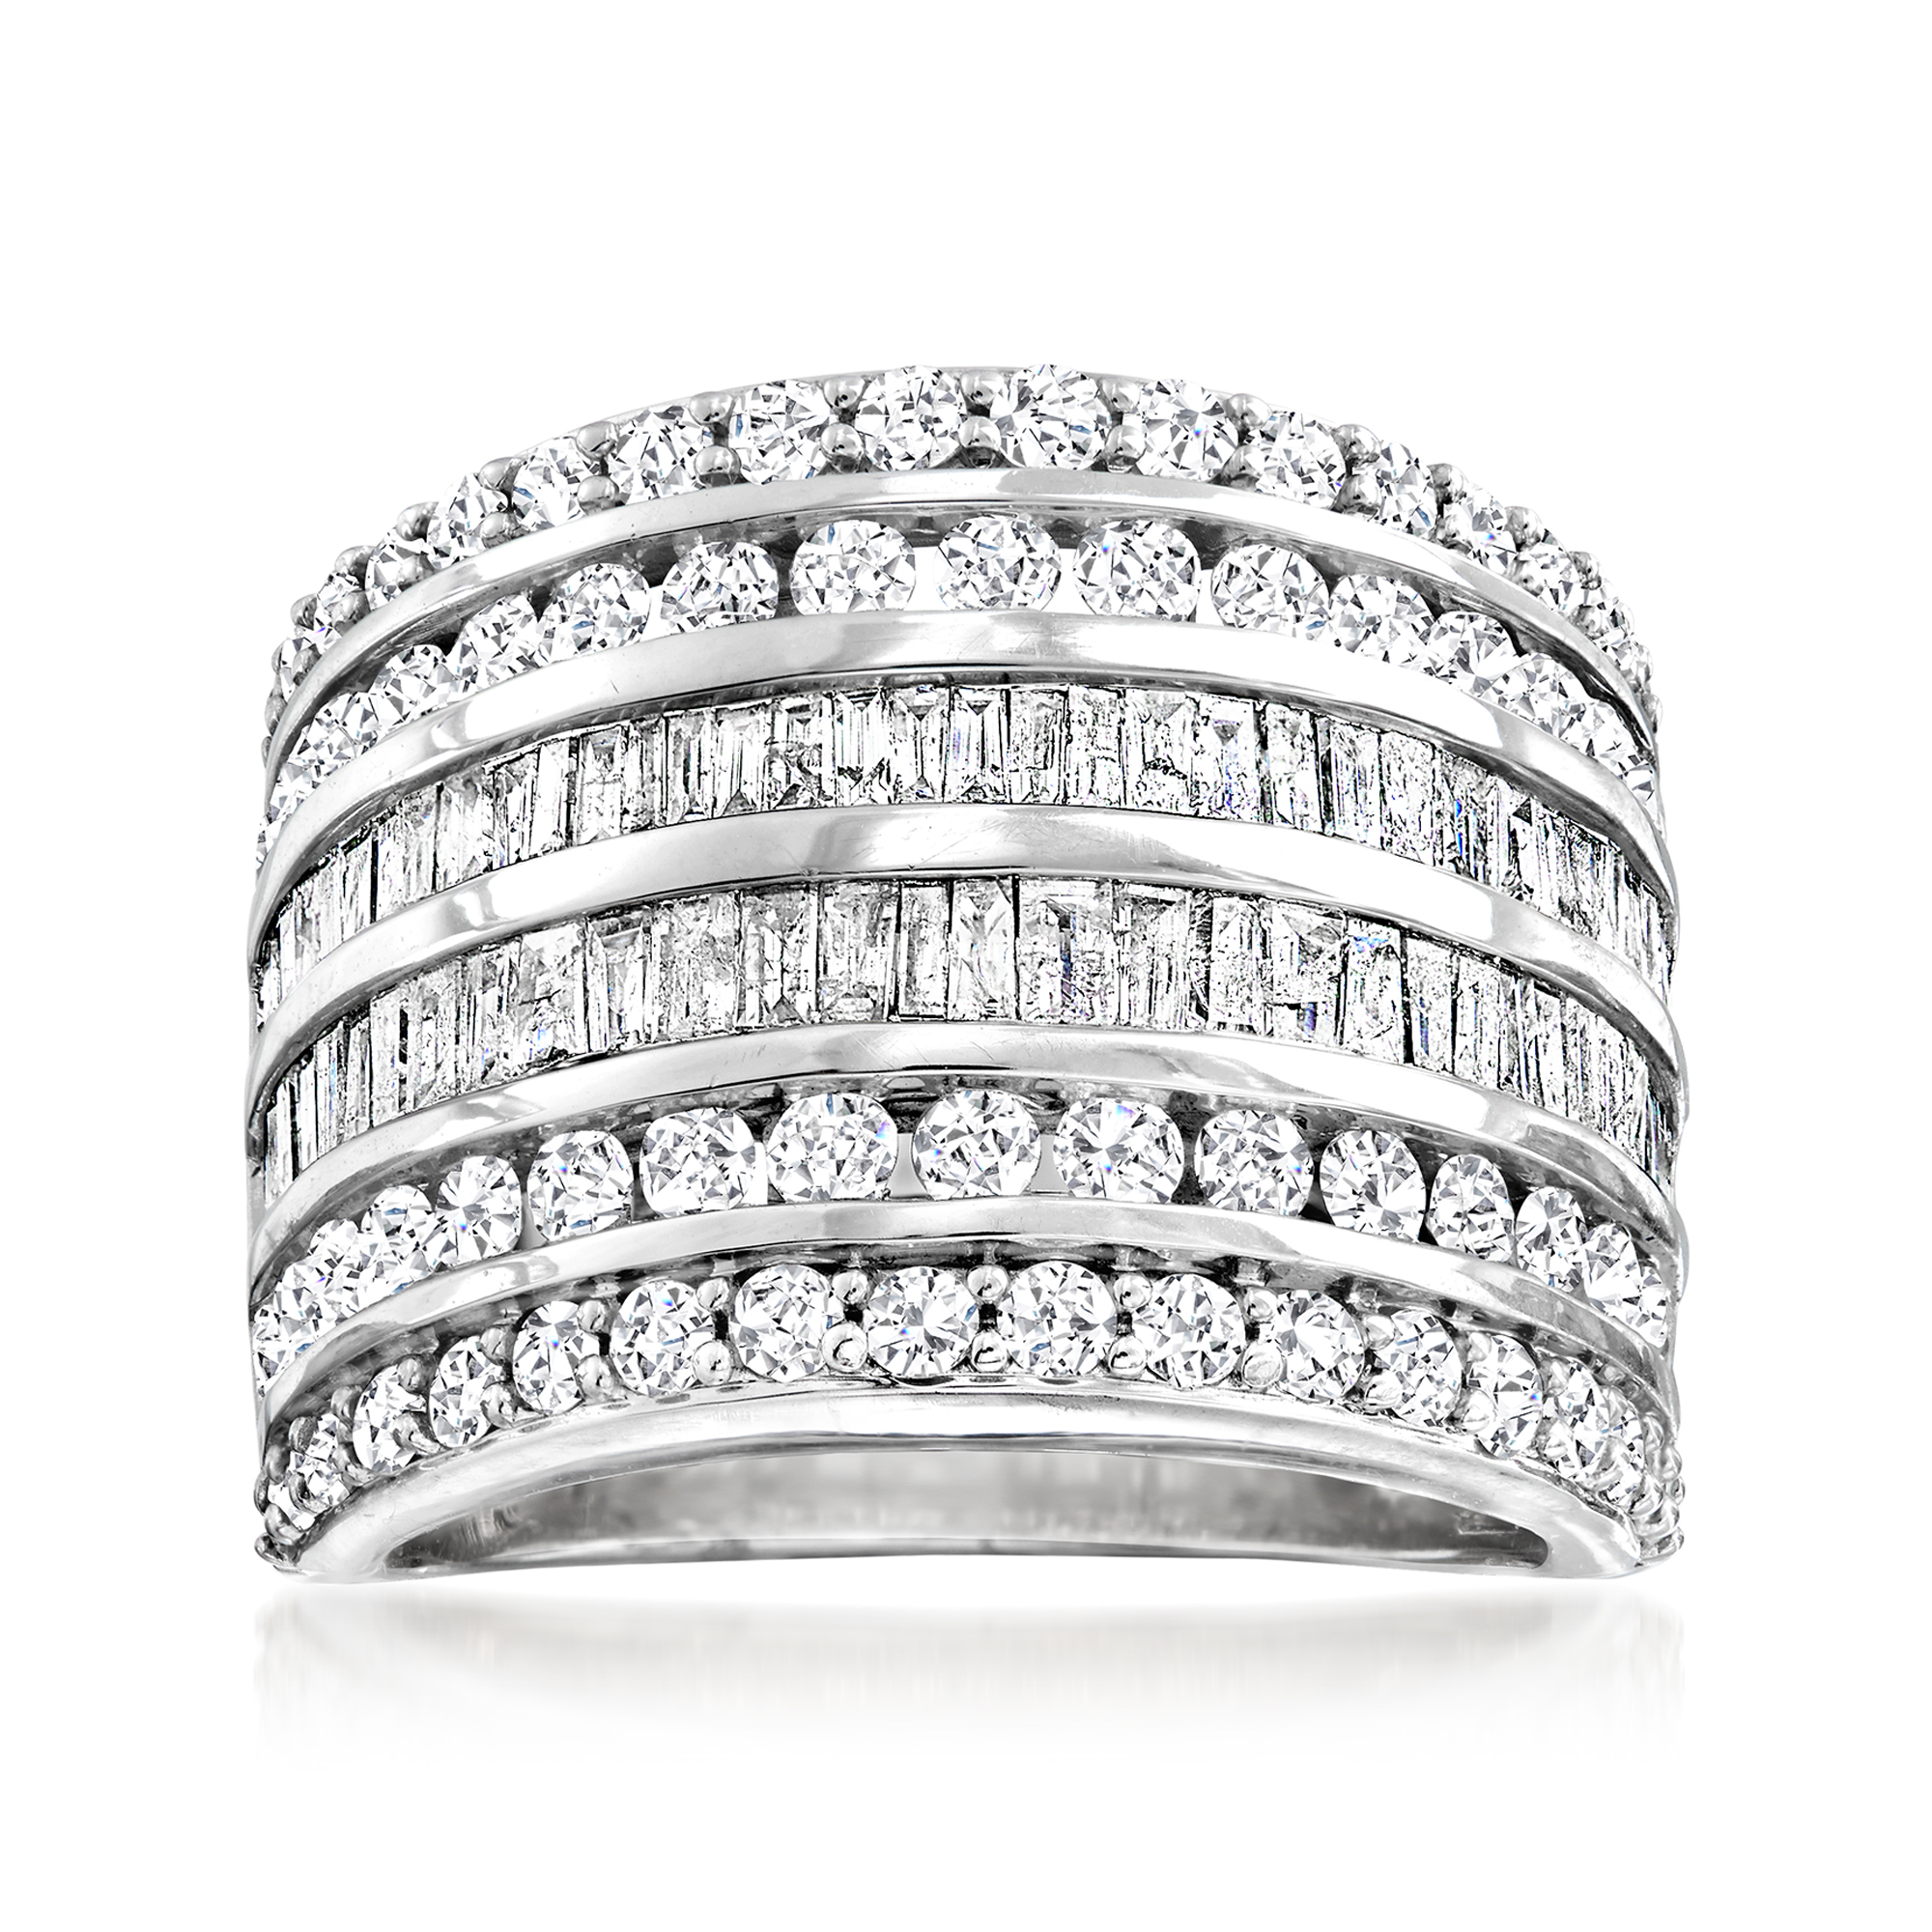 3.00 ct. t.w. Baguette and Round Diamond Multi-Row Ring in